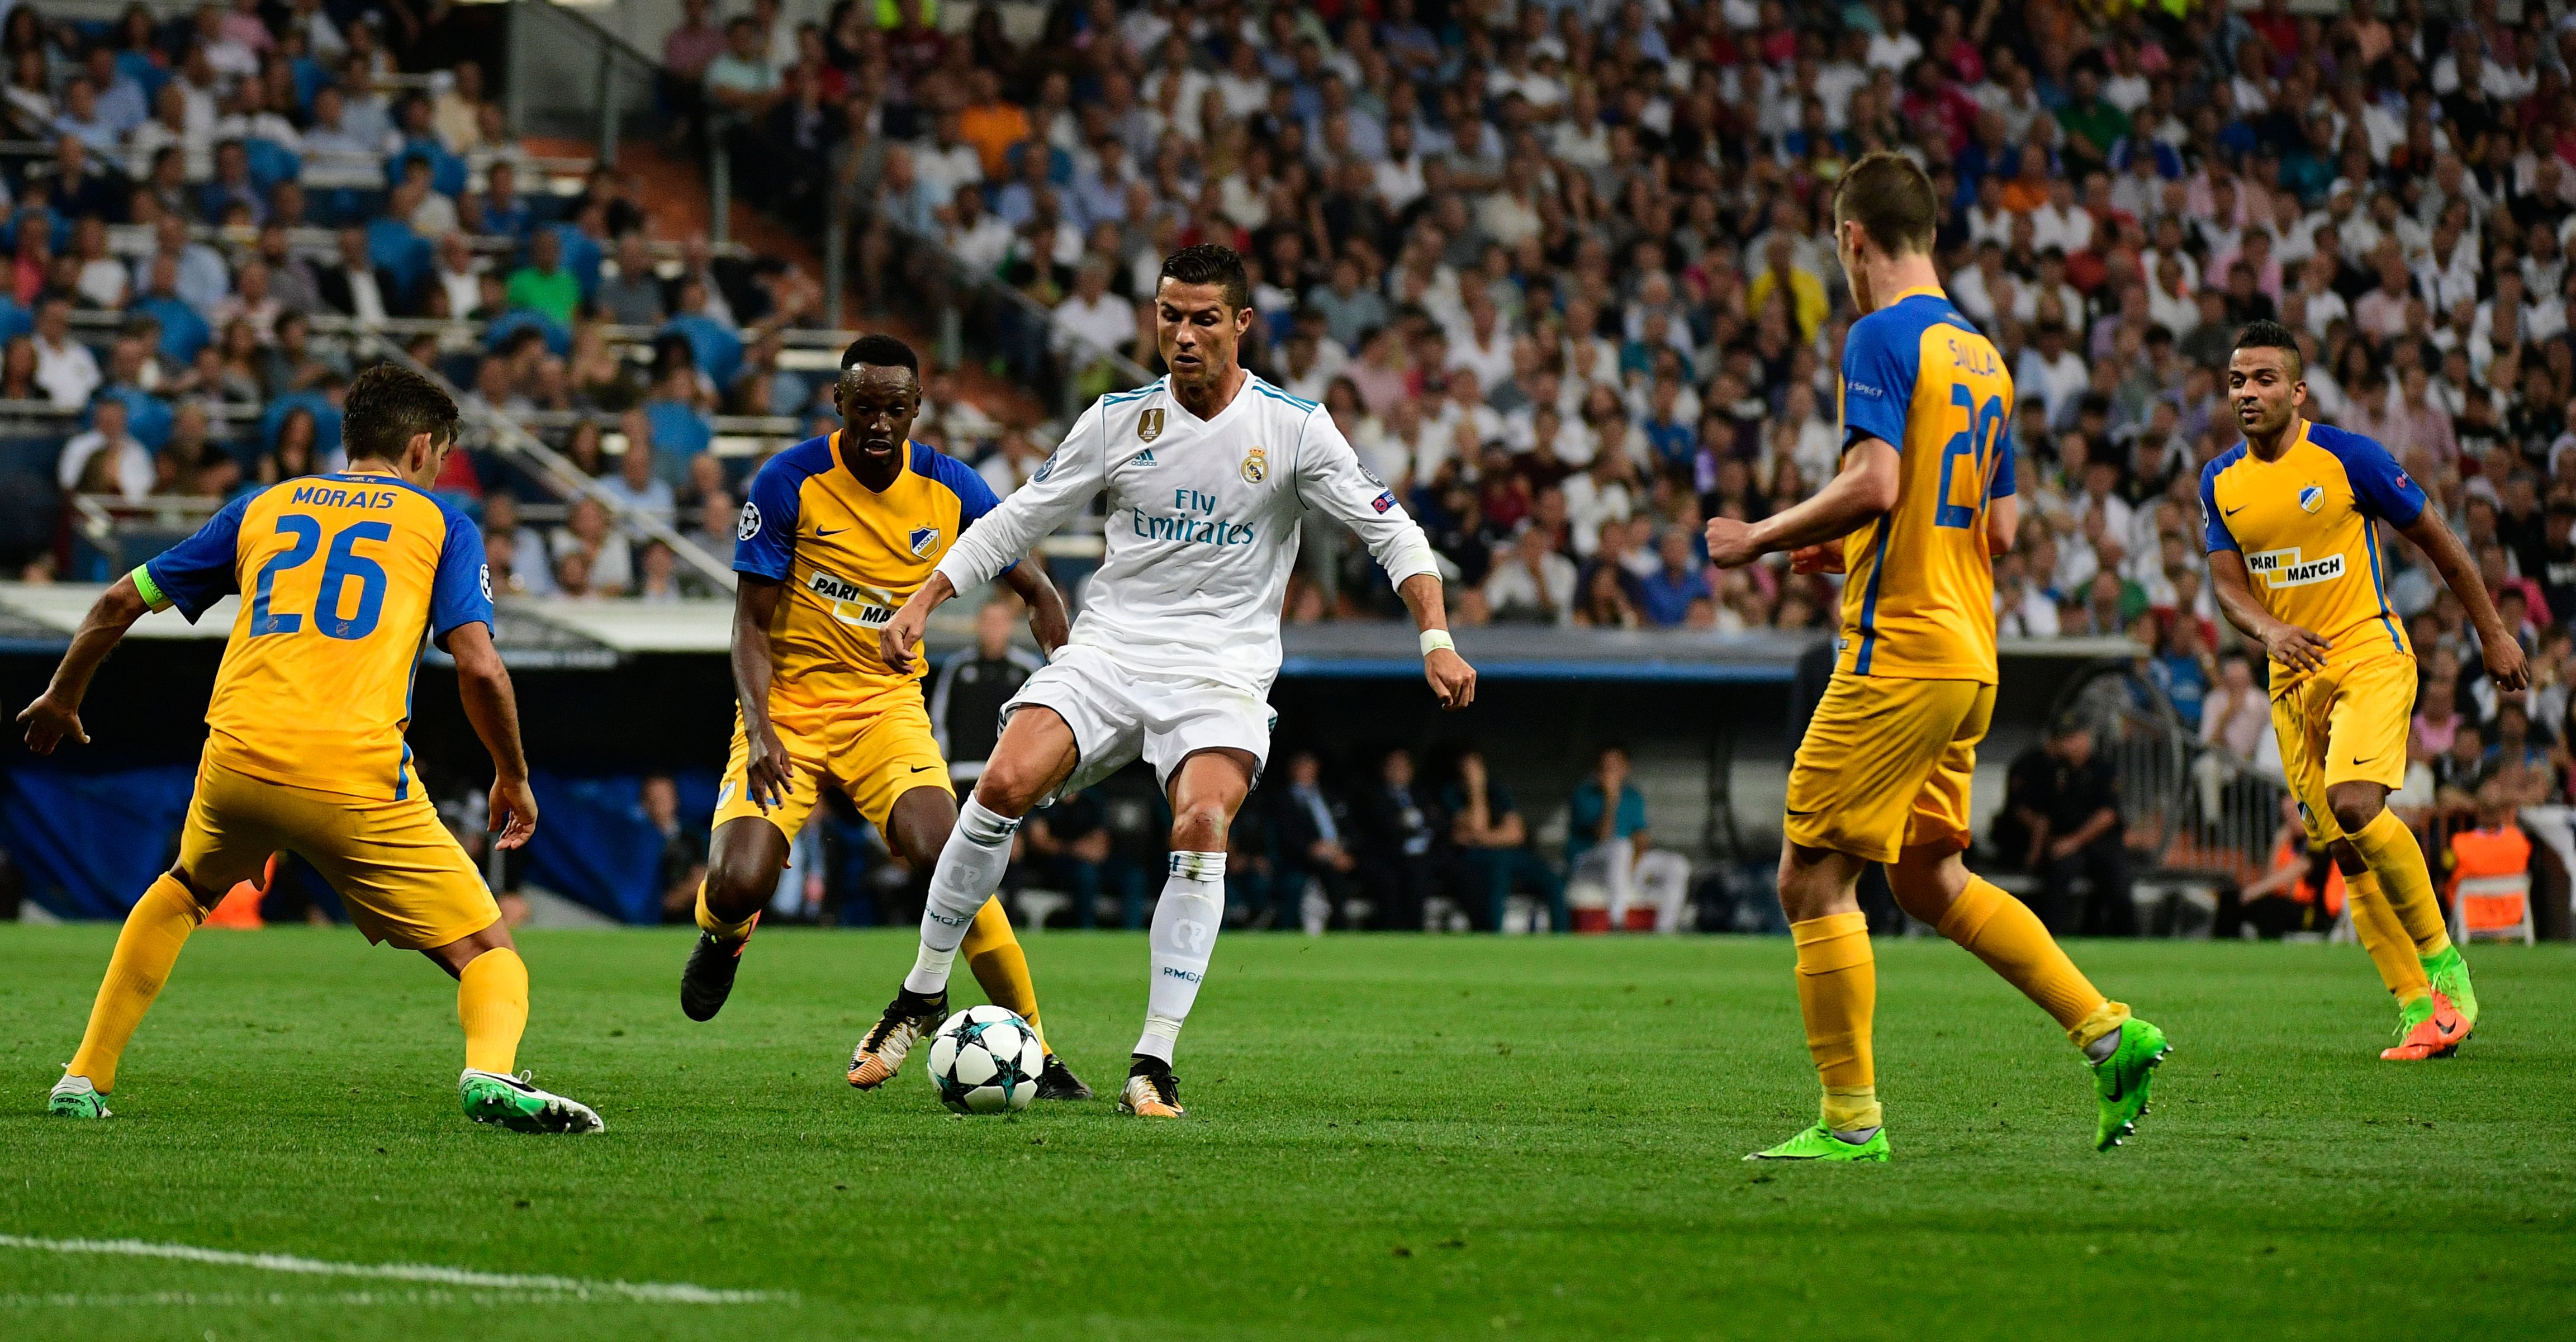 TOPSHOT - Real Madrid's forward from Portugal Cristiano Ronaldo controls the ball during the UEFA Champions League football match Real Madrid CF vs APOEL FC at the Santiago Bernabeu stadium in Madrid on September 13, 2017. / AFP PHOTO / PIERRE-PHILIPPE MARCOU        (Photo credit should read PIERRE-PHILIPPE MARCOU/AFP/Getty Images)